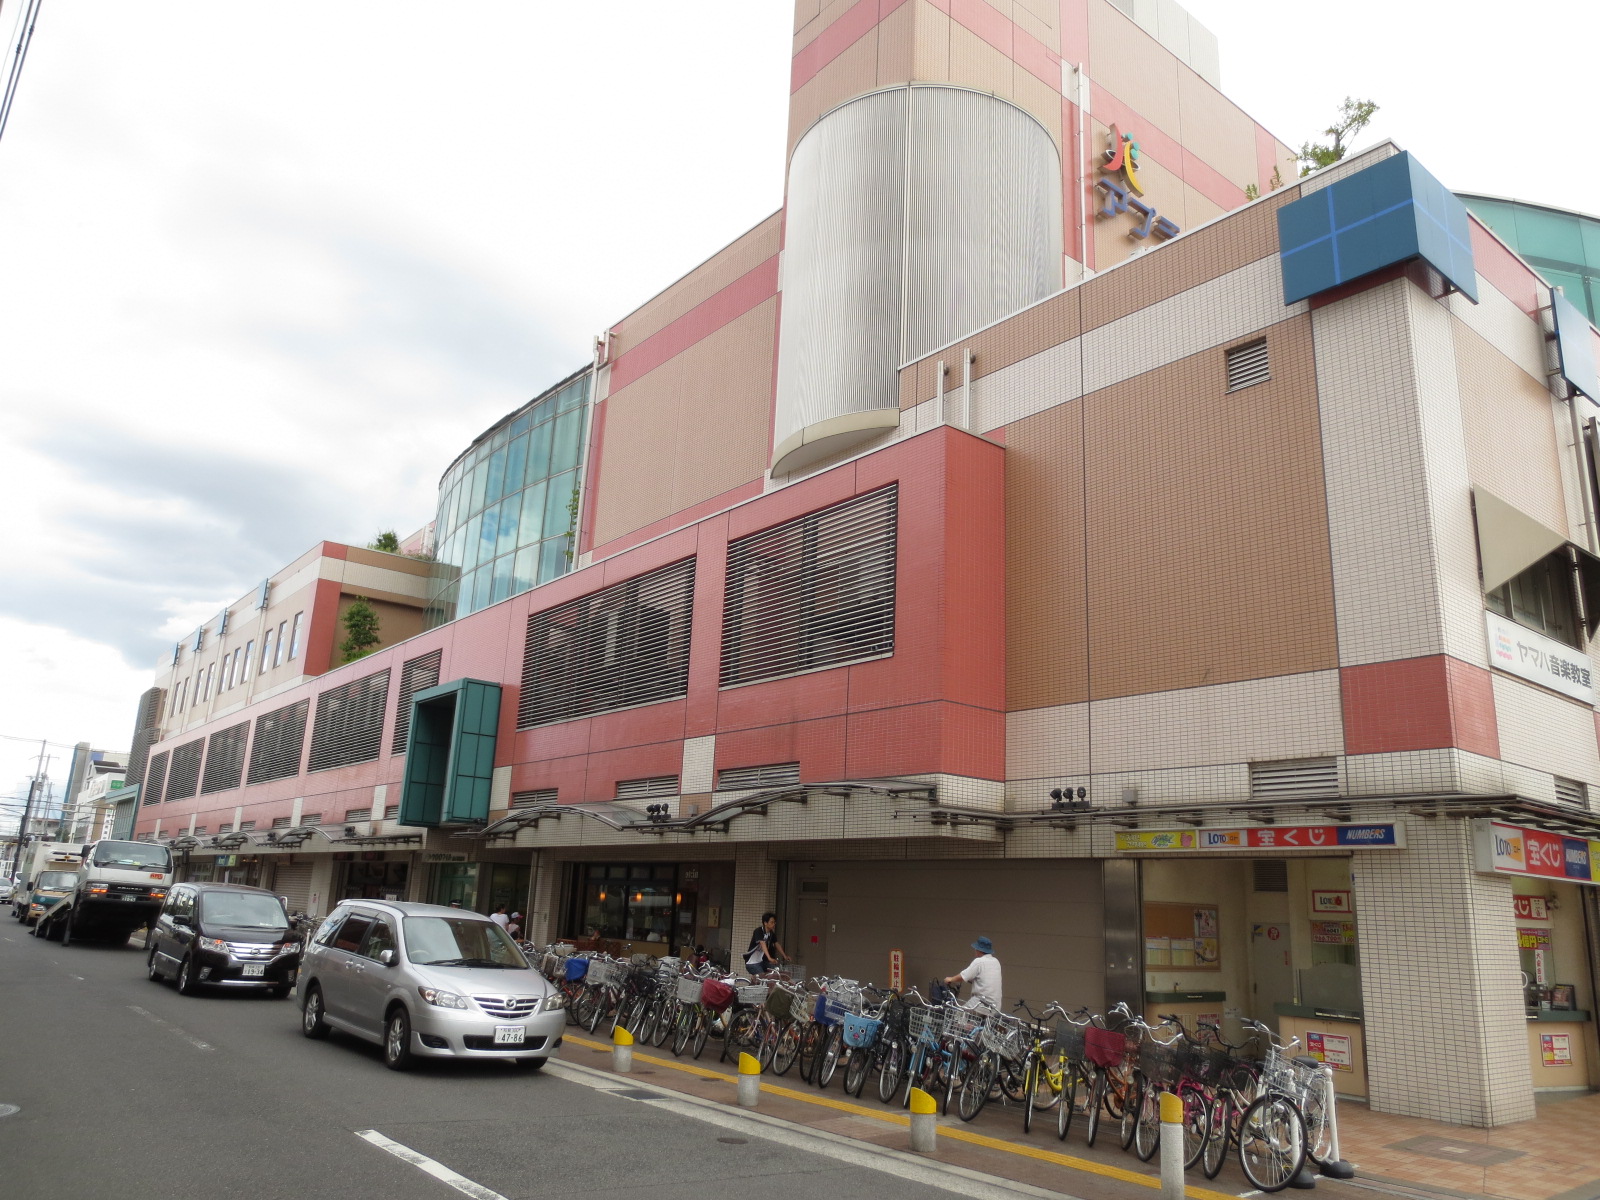 Shopping centre. Apra tall to up to (shopping center) 1351m